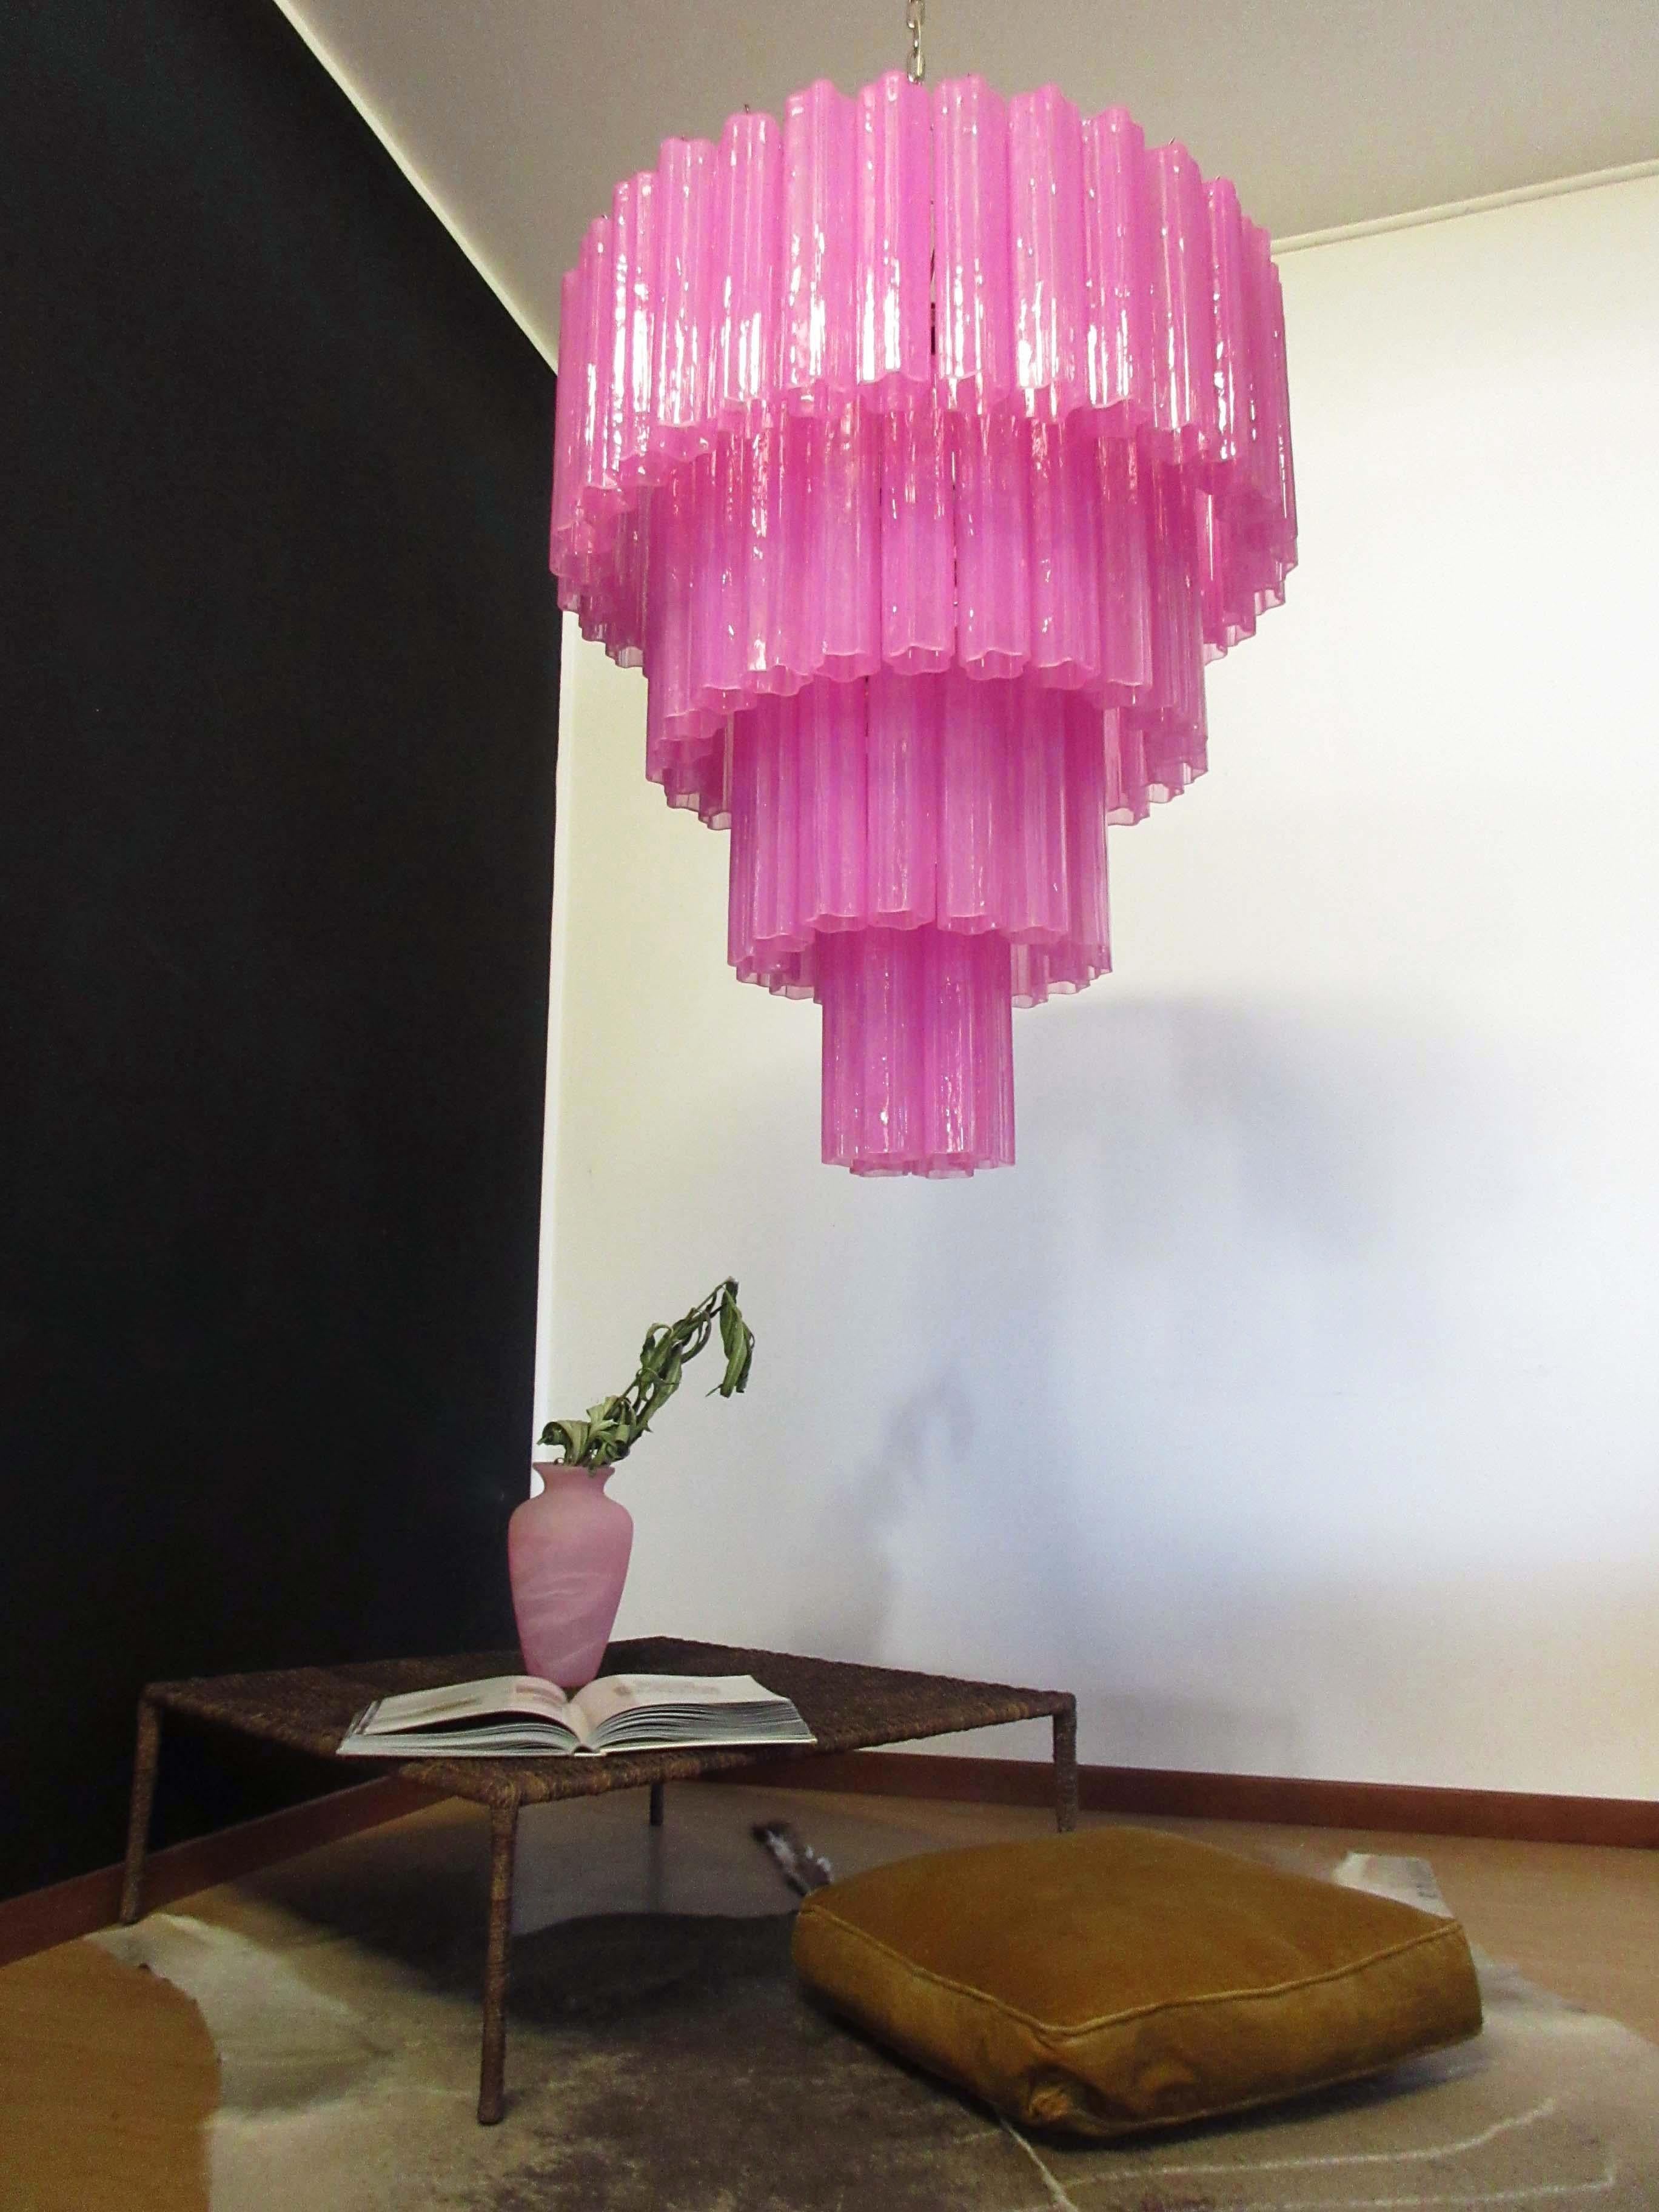 Late 20th Century Huge Vintage Murano Glass Tiered Chandelier - 78 Glasses - Pink Fuxia Silk